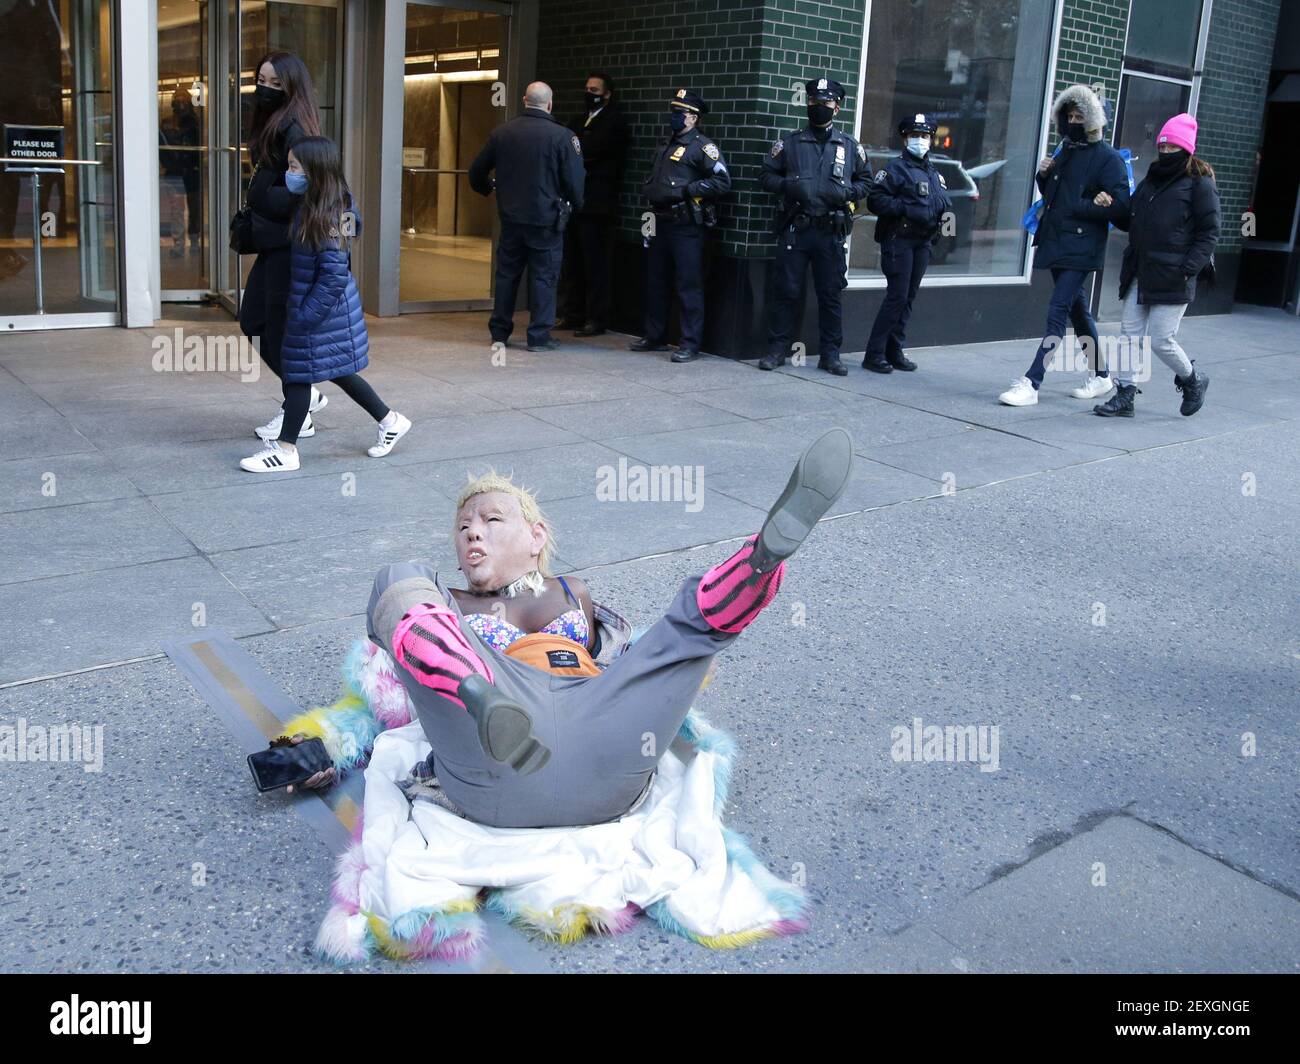 New York, United States. 04th Mar, 2021. A protester with a Donald Trump Mask lies on the sidewalk at an 'I Believe Women' protest outside of the Manhattan office of New York Gov. Andrew Cuomo in New York City on Thursday, March 4, 2021. Calls for New York Gov. Andrew Cuomo's resignation have increased after a third woman accused him of offensive behavior earlier this week. Photo by John Angelillo/UPI Credit: UPI/Alamy Live News Stock Photo